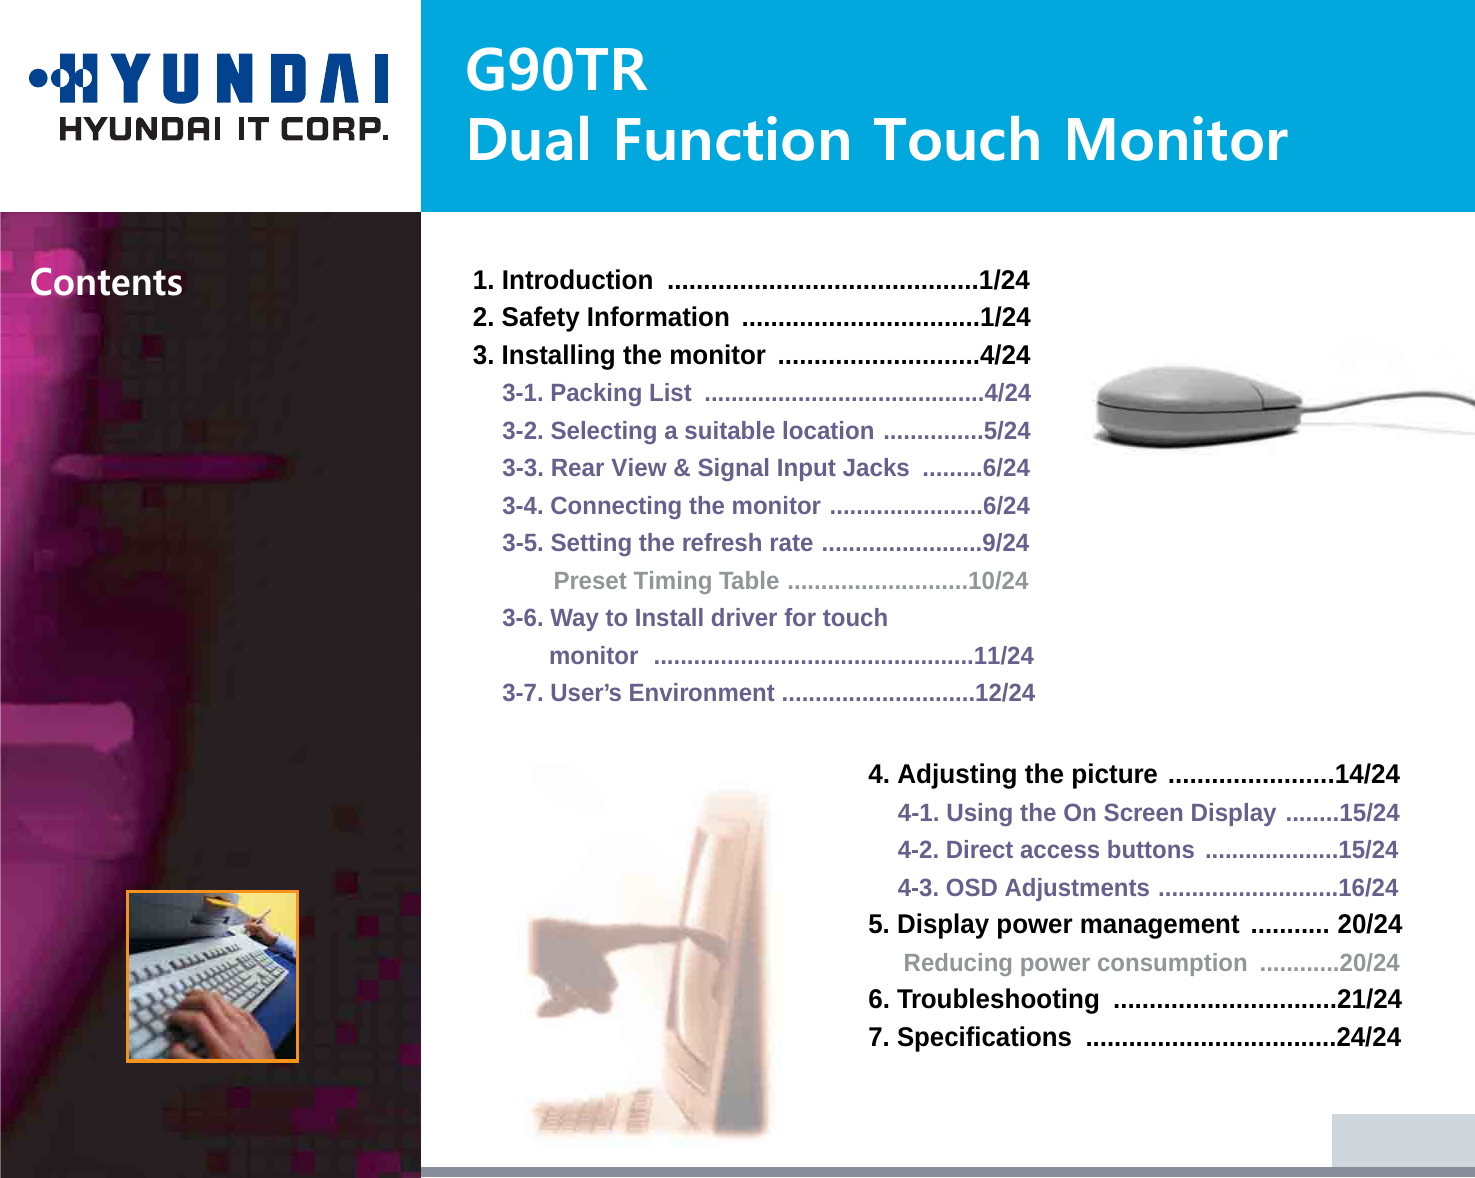 G90TRDual Function Touch MonitorContents1. Introduction  ...........................................1/242. Safety Information  .................................1/243. Installing the monitor ............................4/243-1. Packing List  ..........................................4/243-2. Selecting a suitable location ...............5/243-3. Rear View &amp; Signal Input Jacks  .........6/243-4. Connecting the monitor .......................6/243-5. Setting the refresh rate ........................9/24Preset Timing Table ...........................10/243-6. Way to Install driver for touch monitor ................................................11/243-7. User’s Environment .............................12/244. Adjusting the picture .......................14/244-1. Using the On Screen Display ........15/244-2. Direct access buttons ....................15/244-3. OSD Adjustments ...........................16/245. Display power management ........... 20/24Reducing power consumption  ............20/246. Troubleshooting  ...............................21/247. Specifications  ...................................24/24